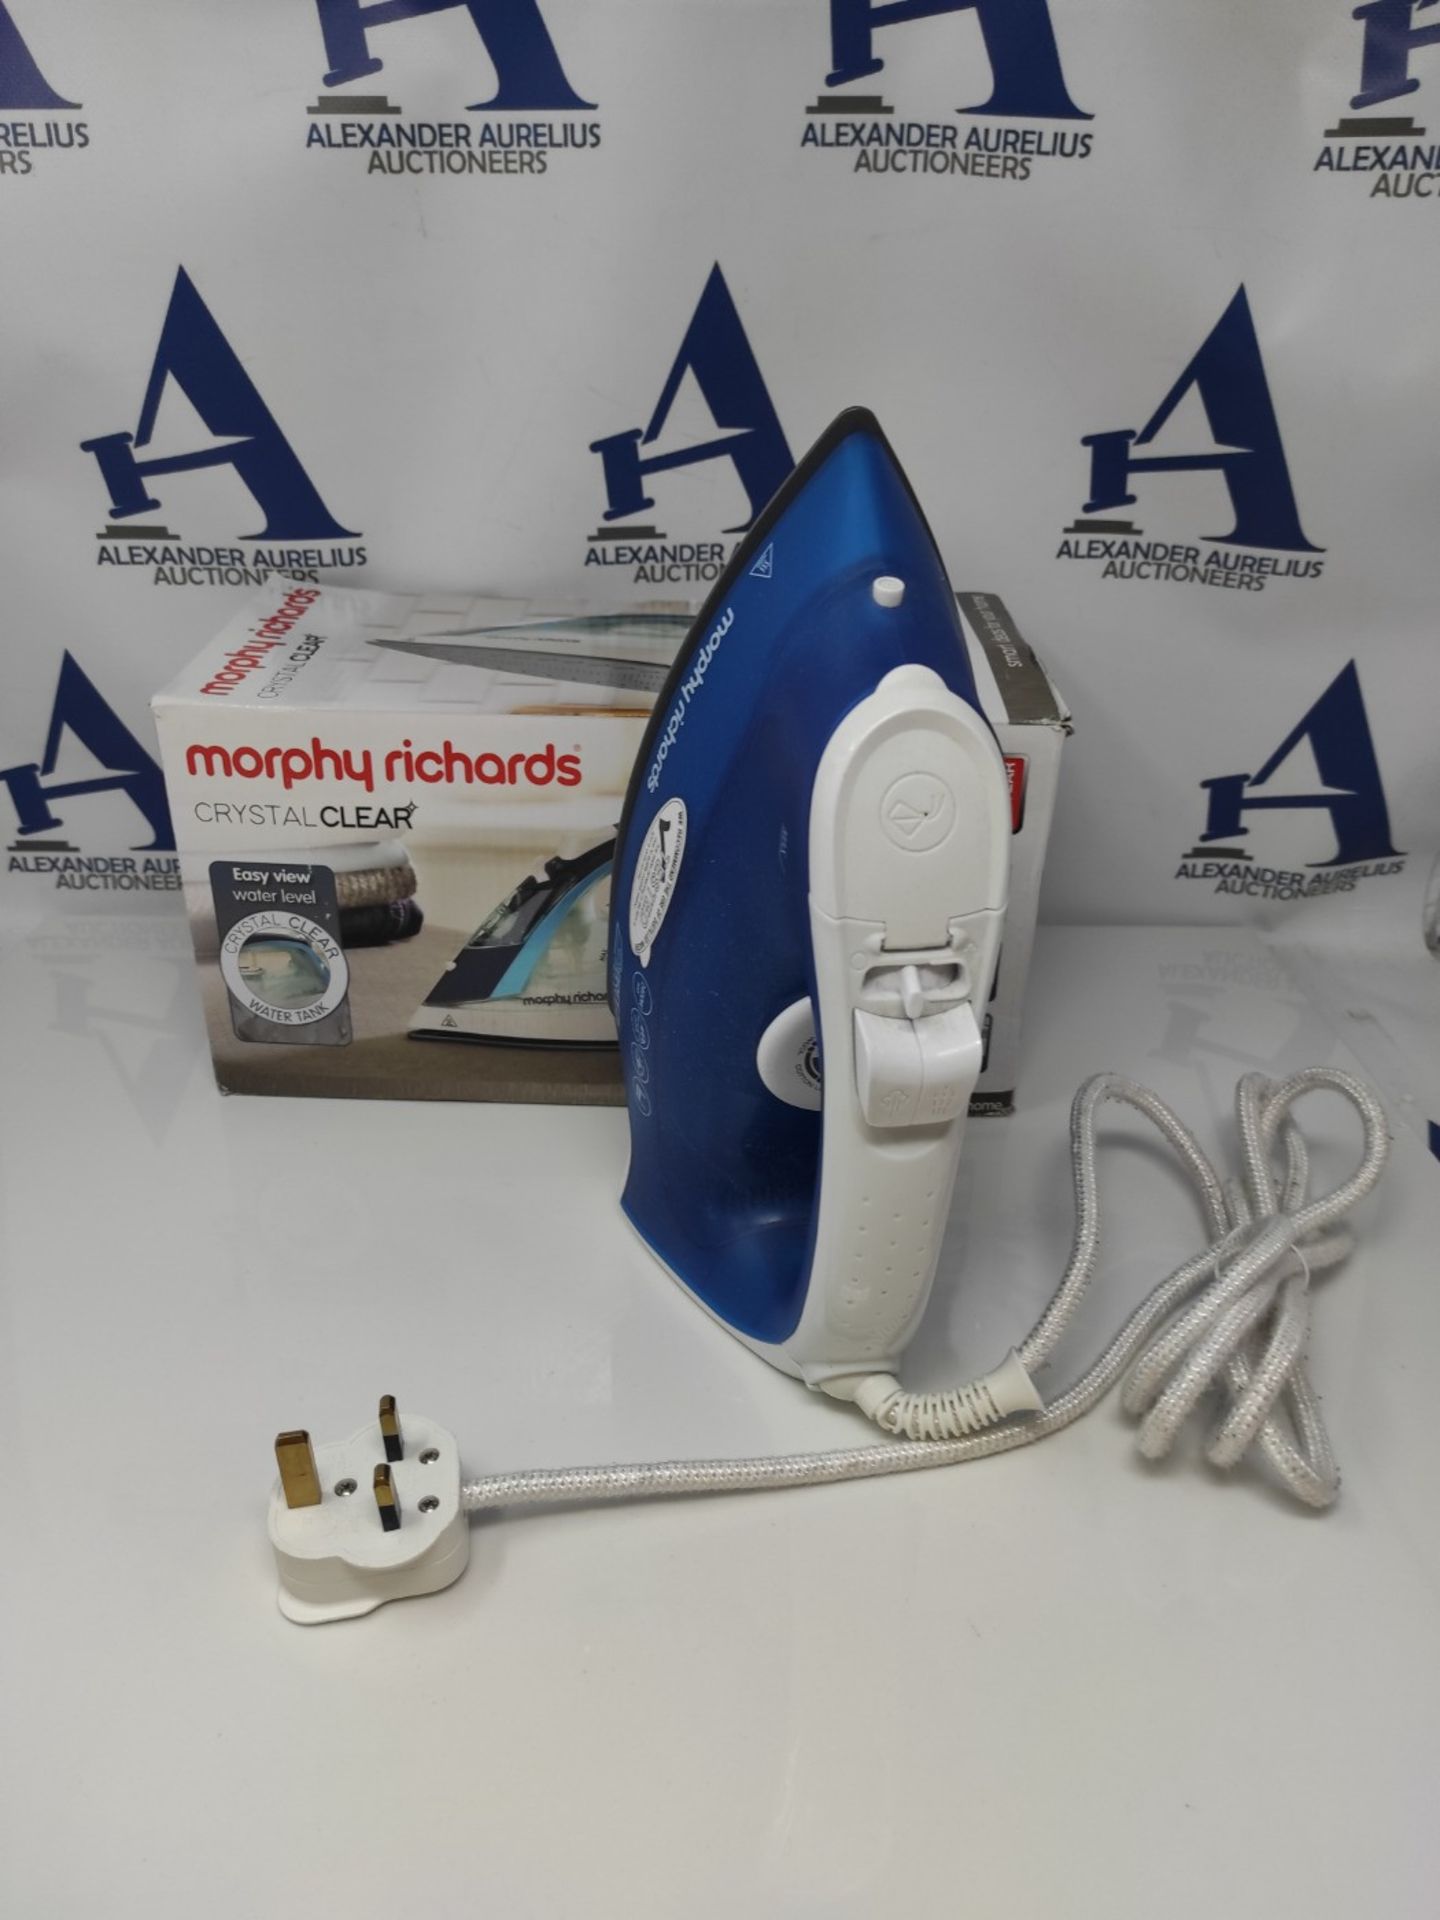 Morphy Richards 300300 Crystal Clear Steam Iron, Turqoise/White - Image 3 of 3